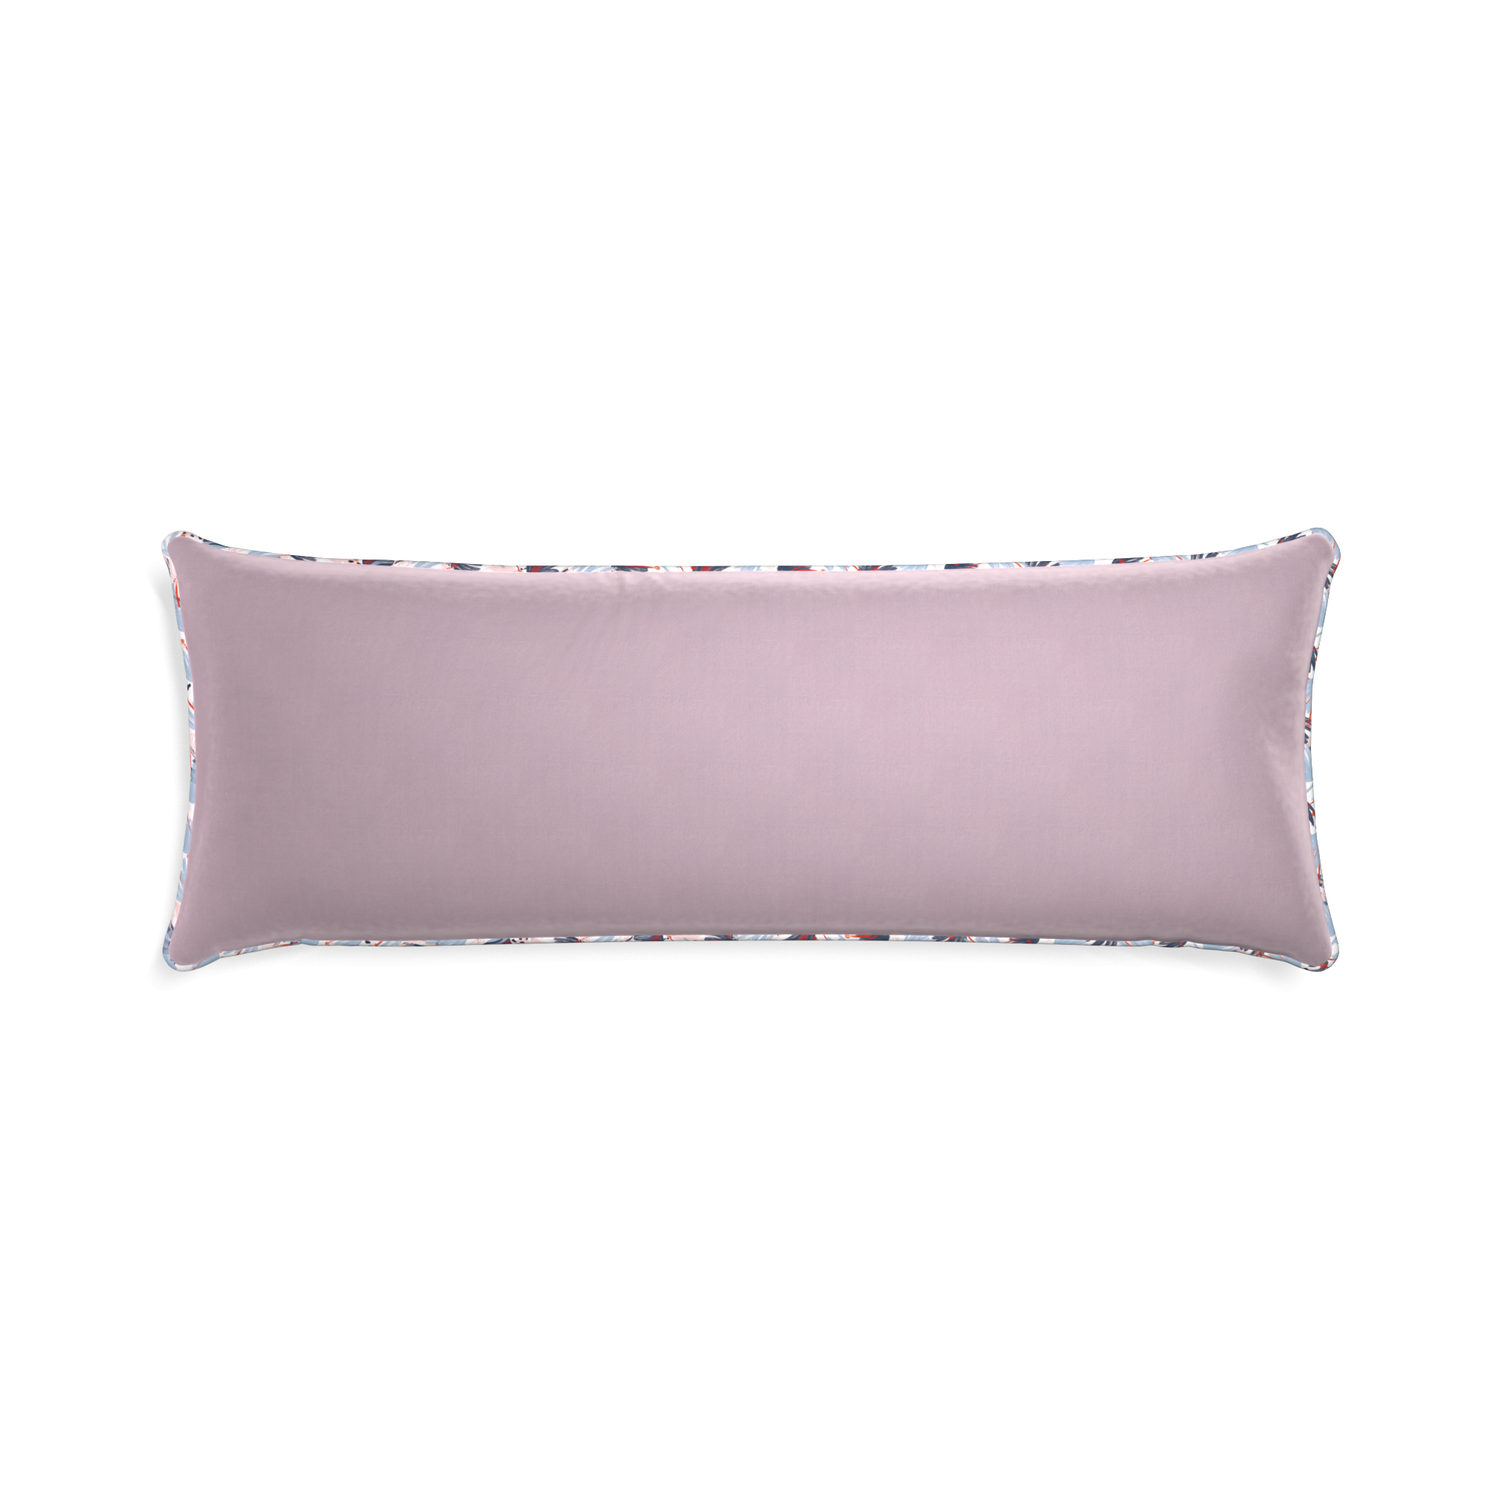 Xl-lumbar lilac velvet custom lilacpillow with e piping on white background